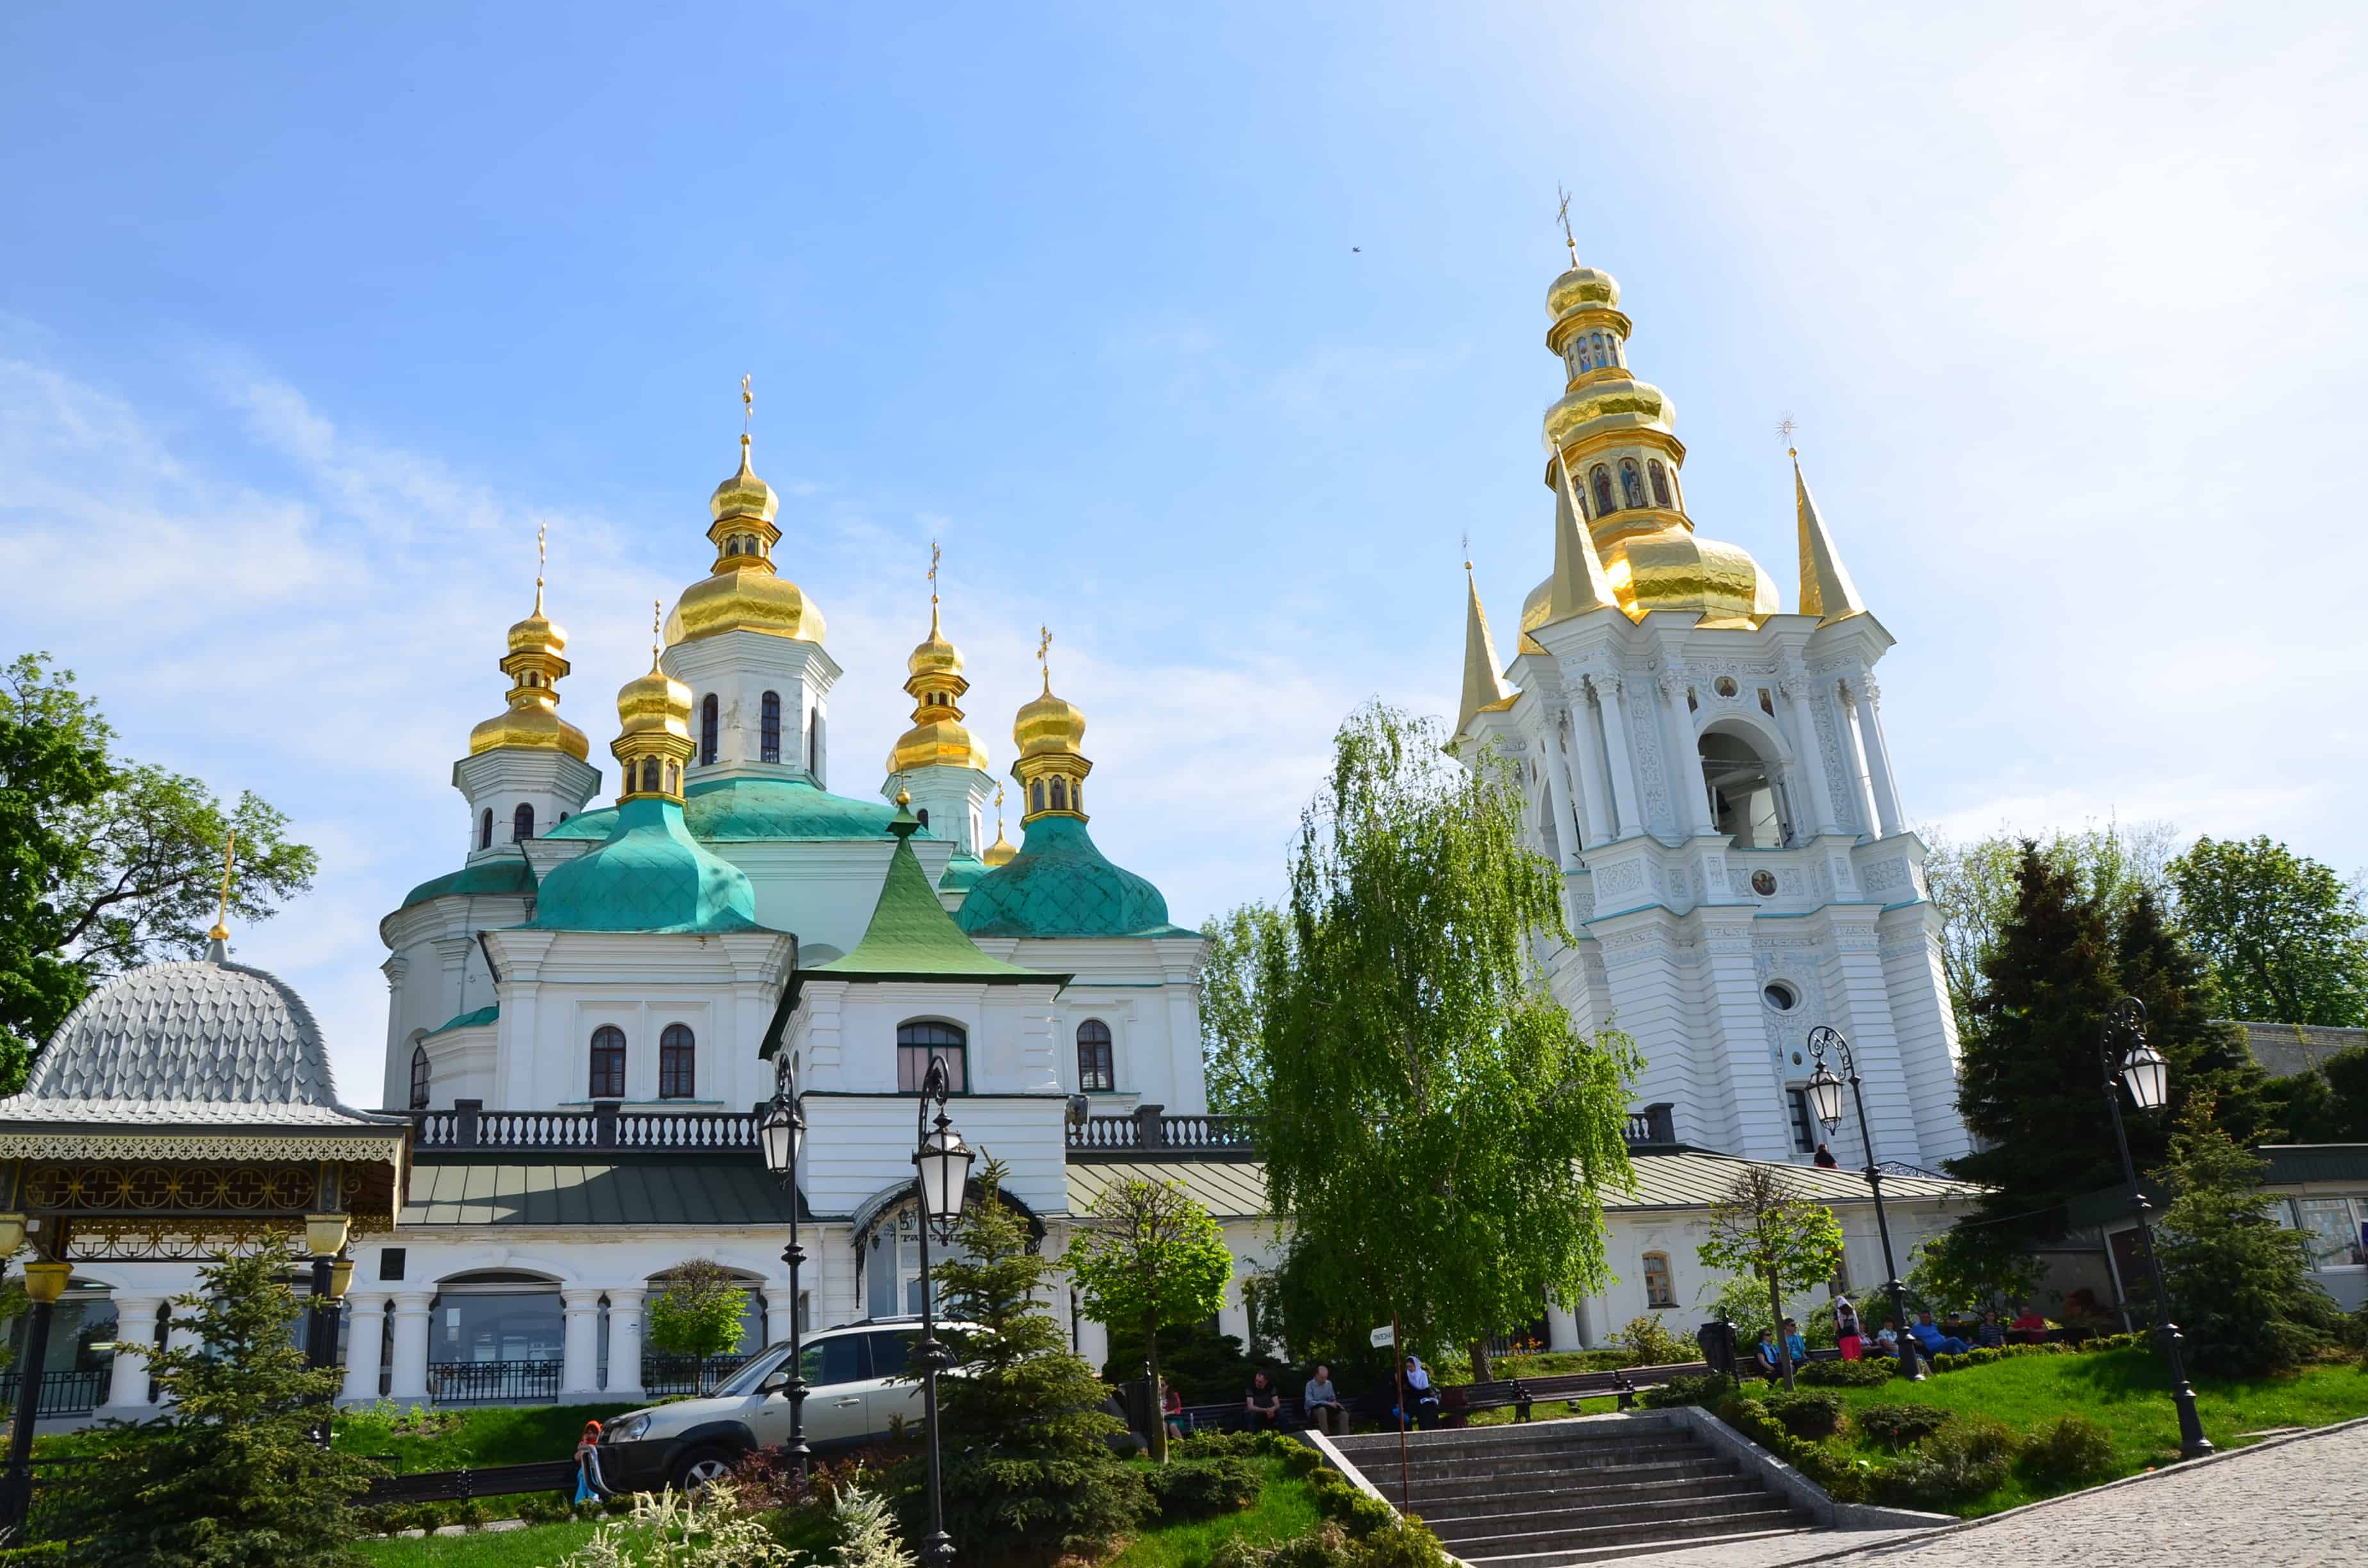 Refectory Church and bell tower at Kyiv Pechersk Lavra in Kyiv, Ukraine